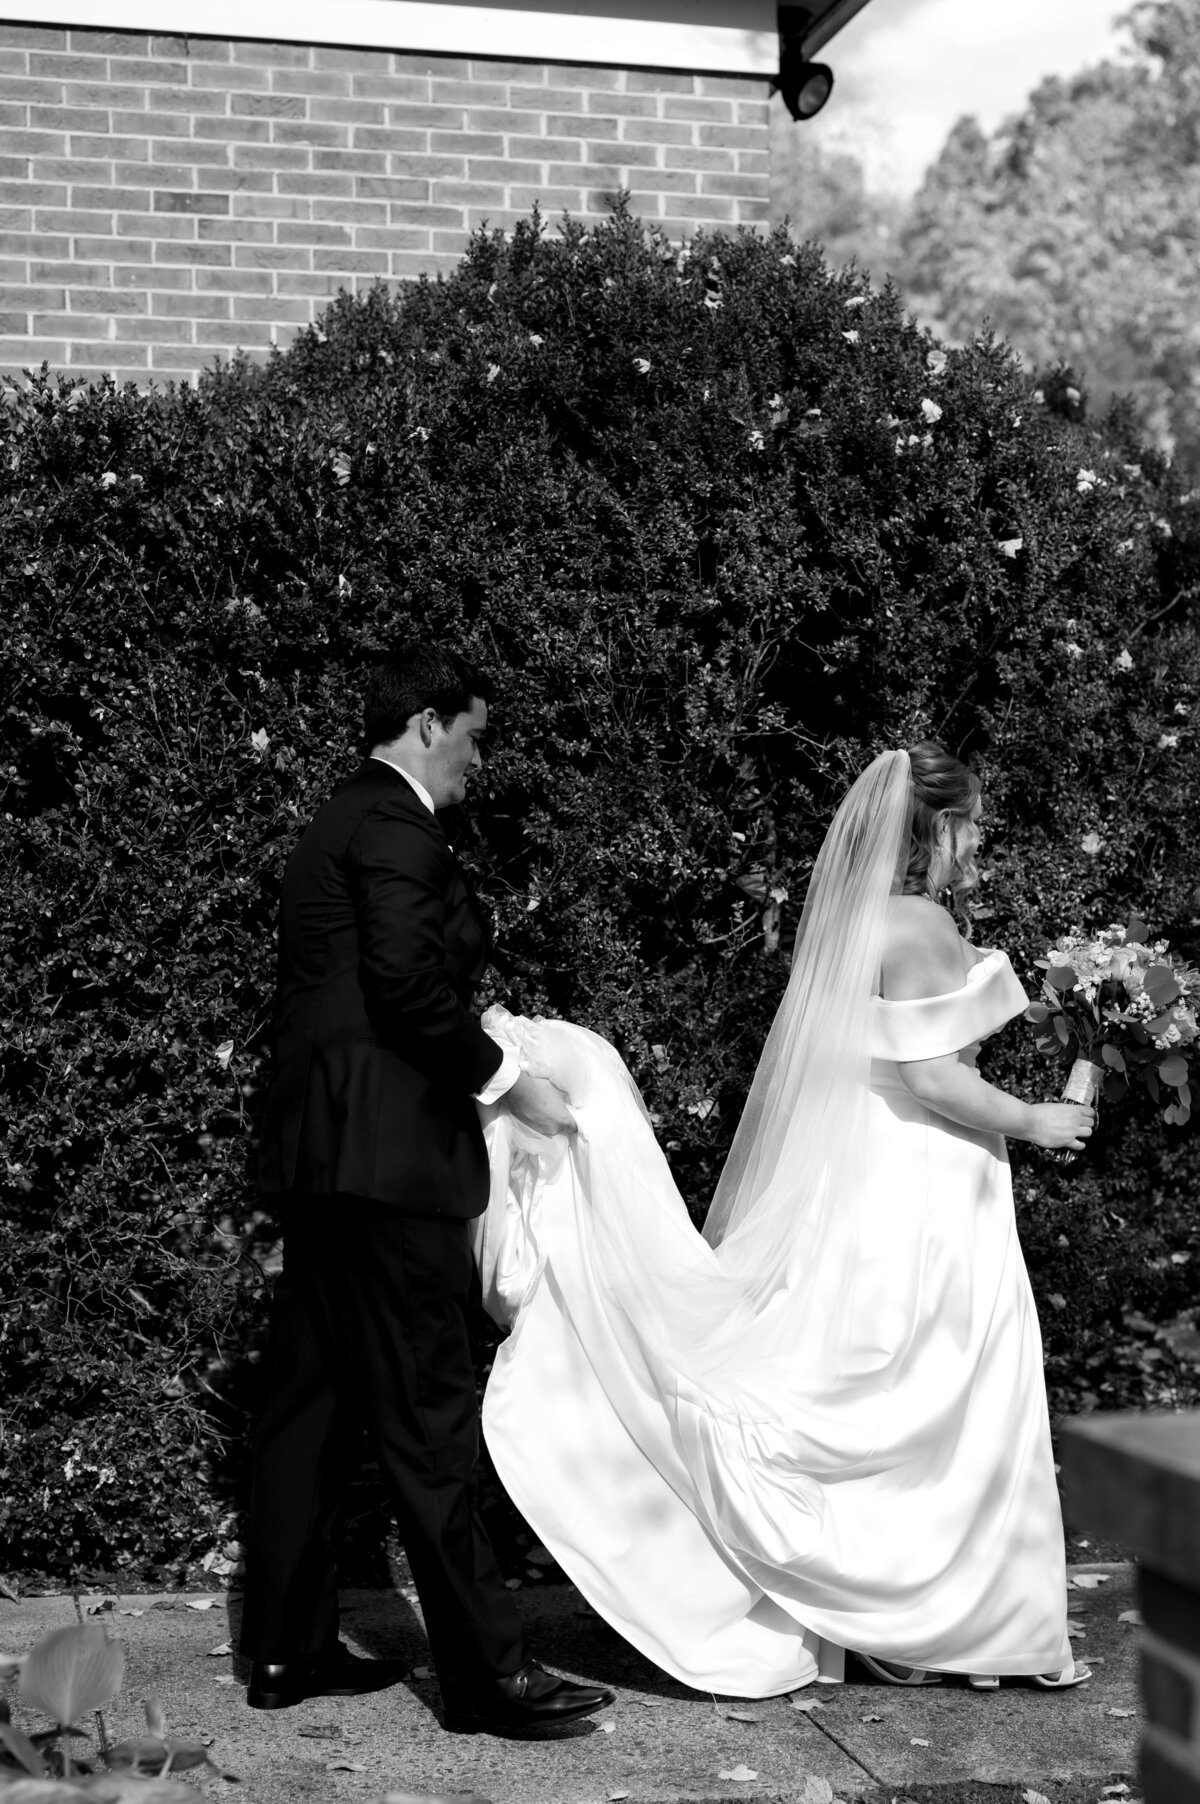 black and white candid wedding picture with groom carrying brides wedding dress as they walk through a garden together at middleburg community center for their Richmond wedding